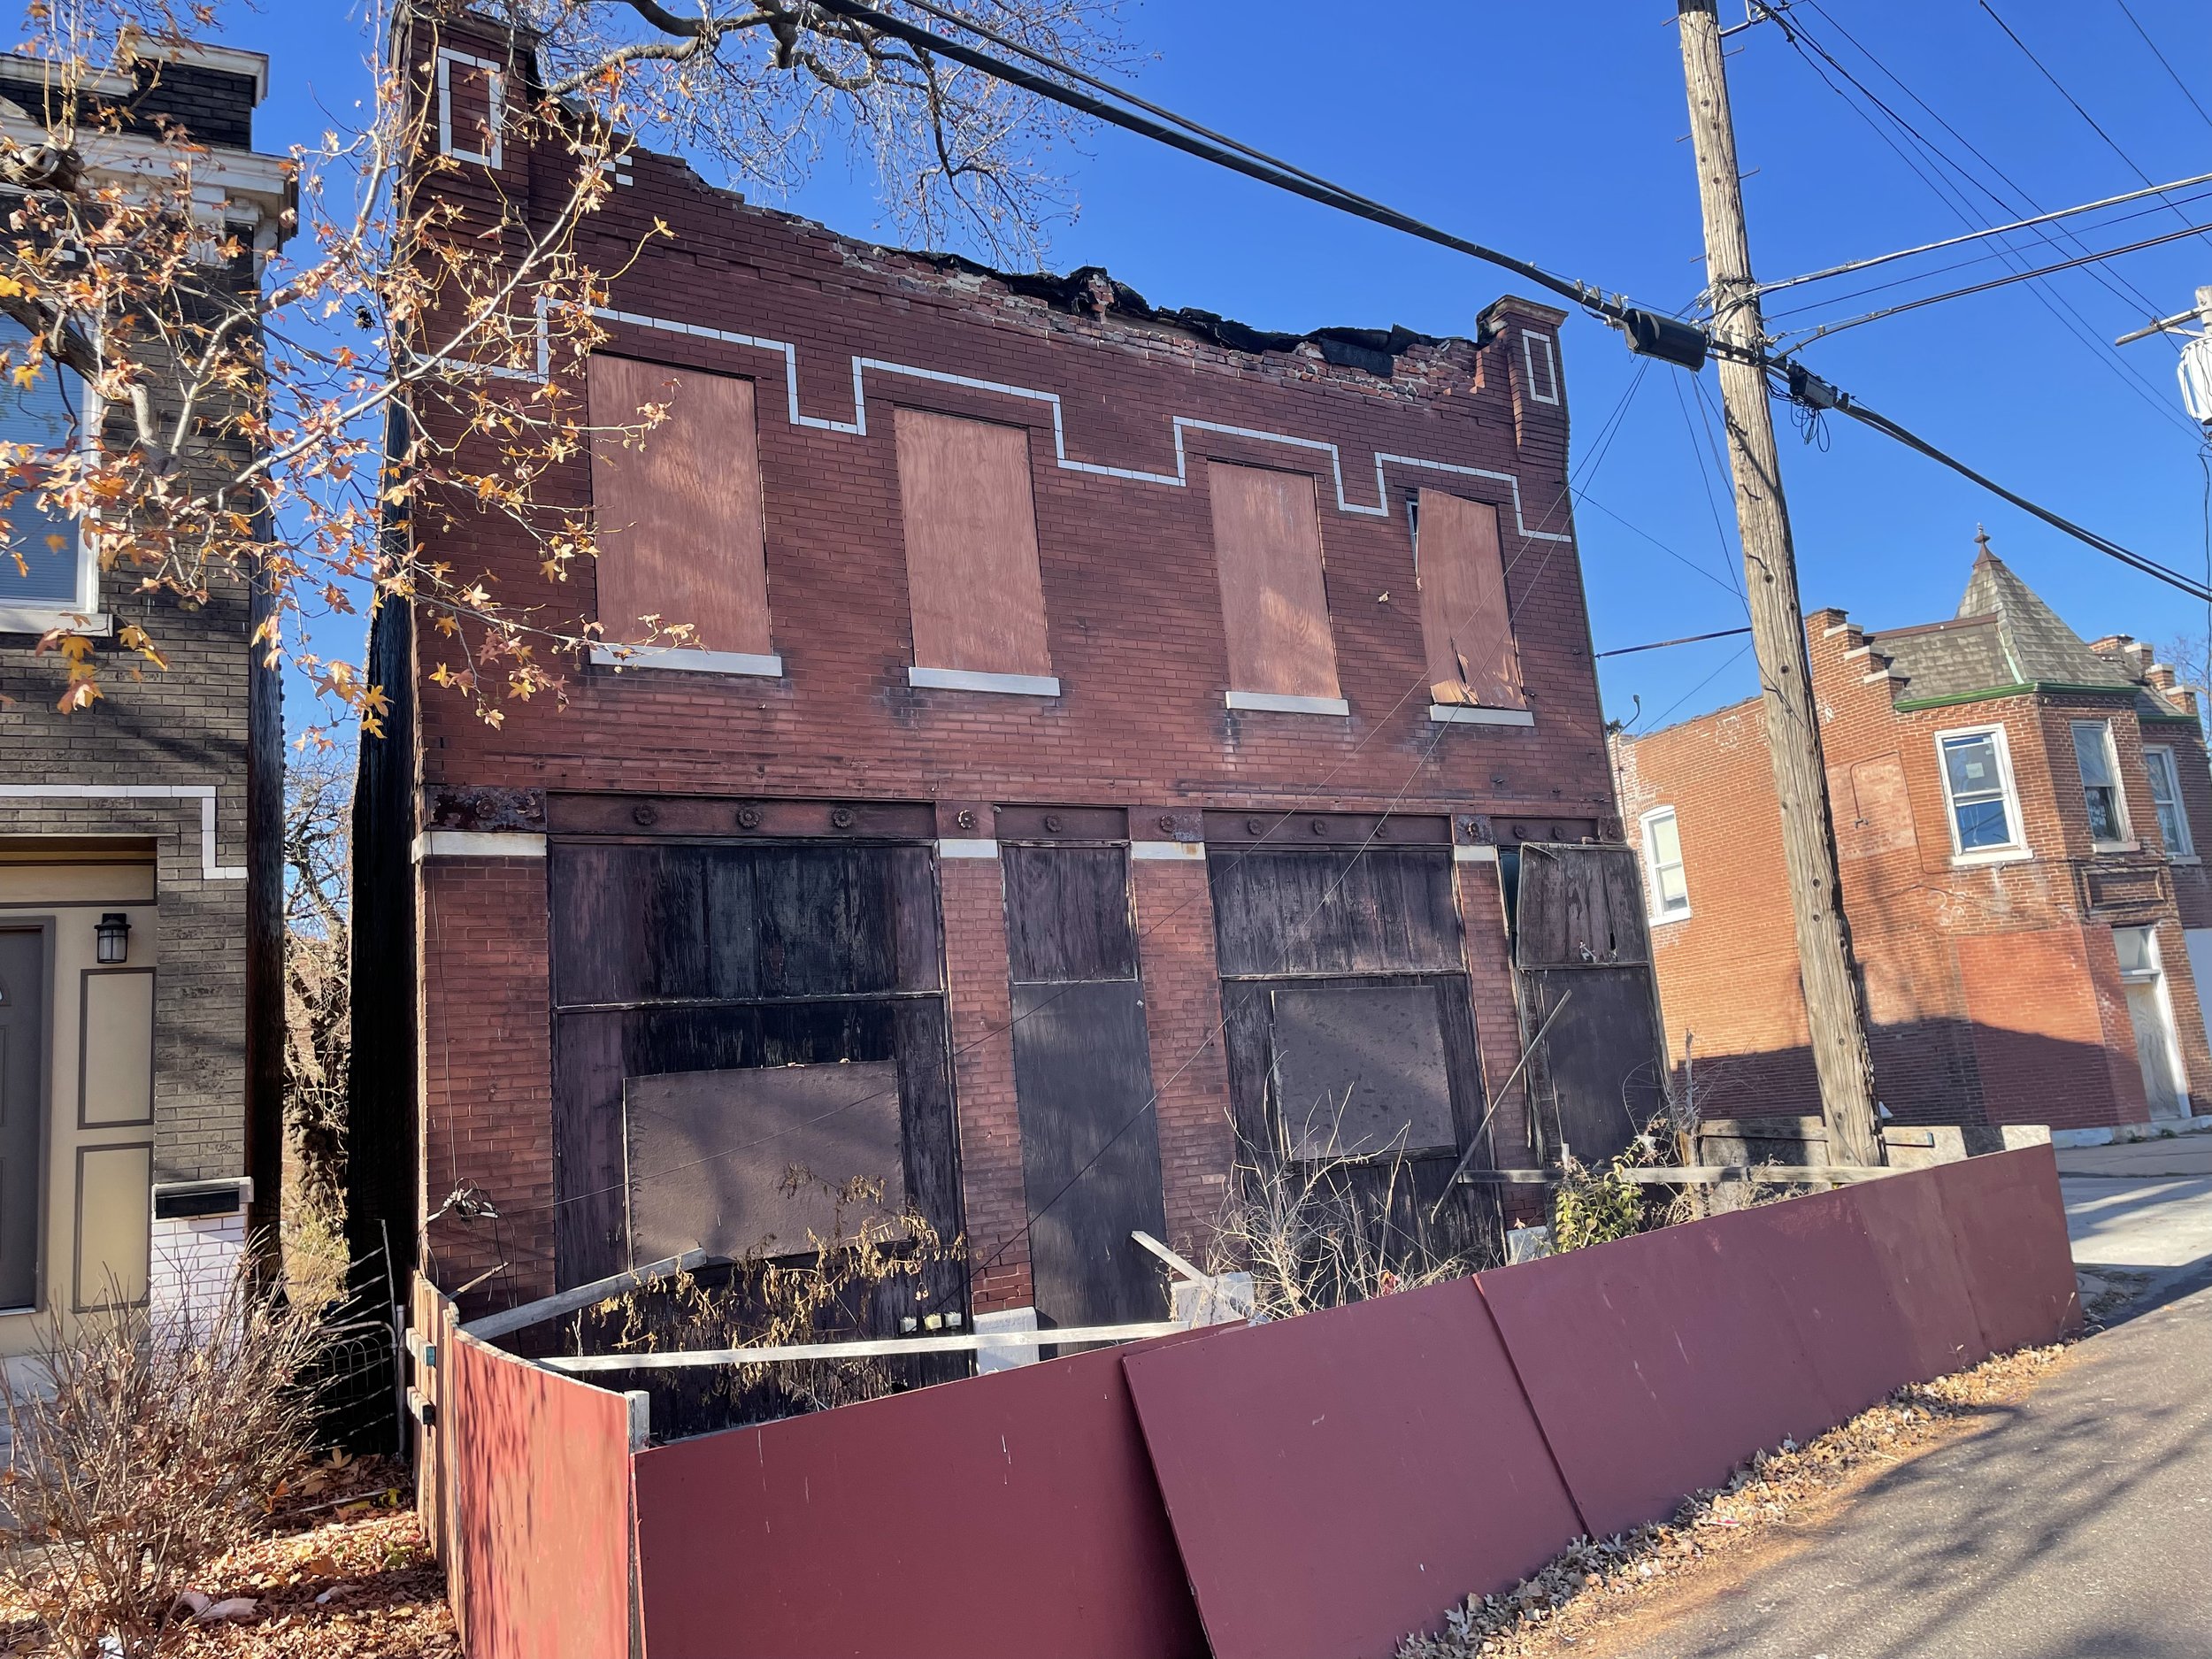 5401 Virginia, an LRA property to be revitalized